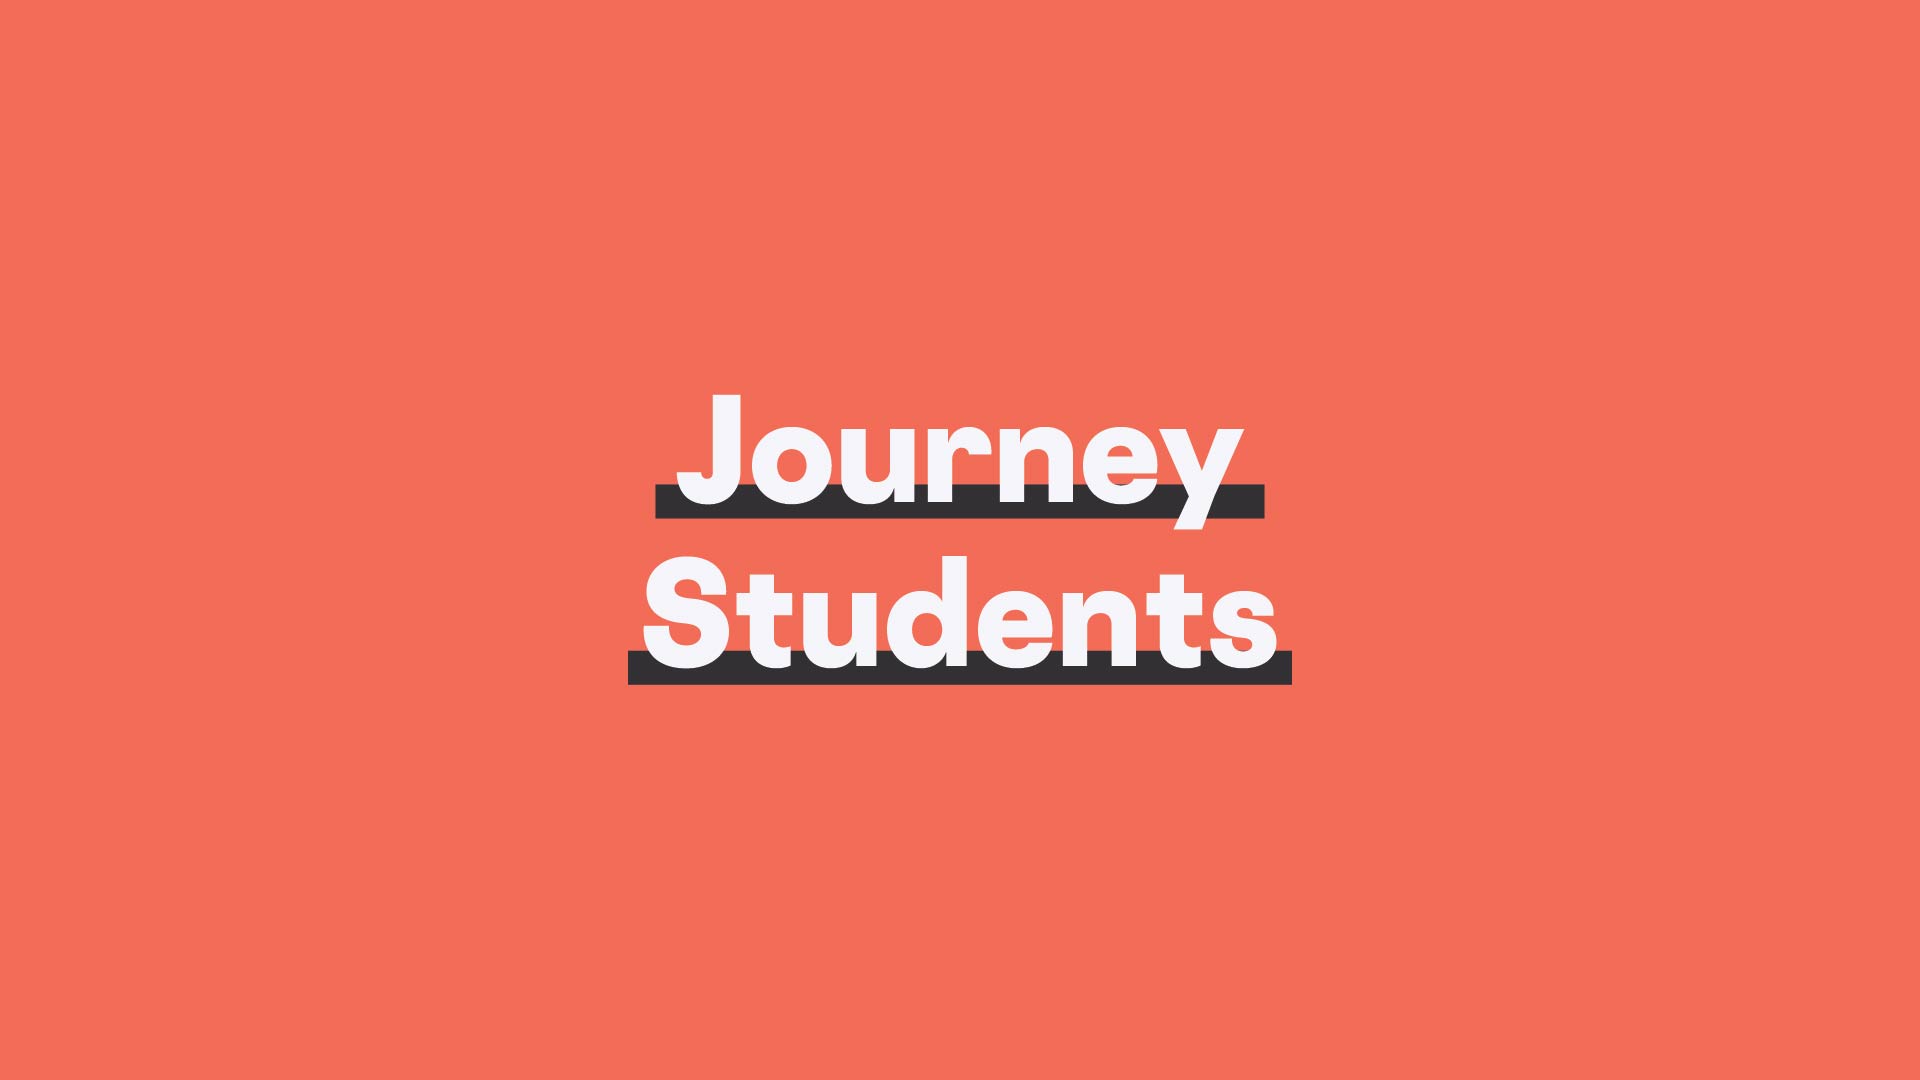 Journey Students: At Your Location